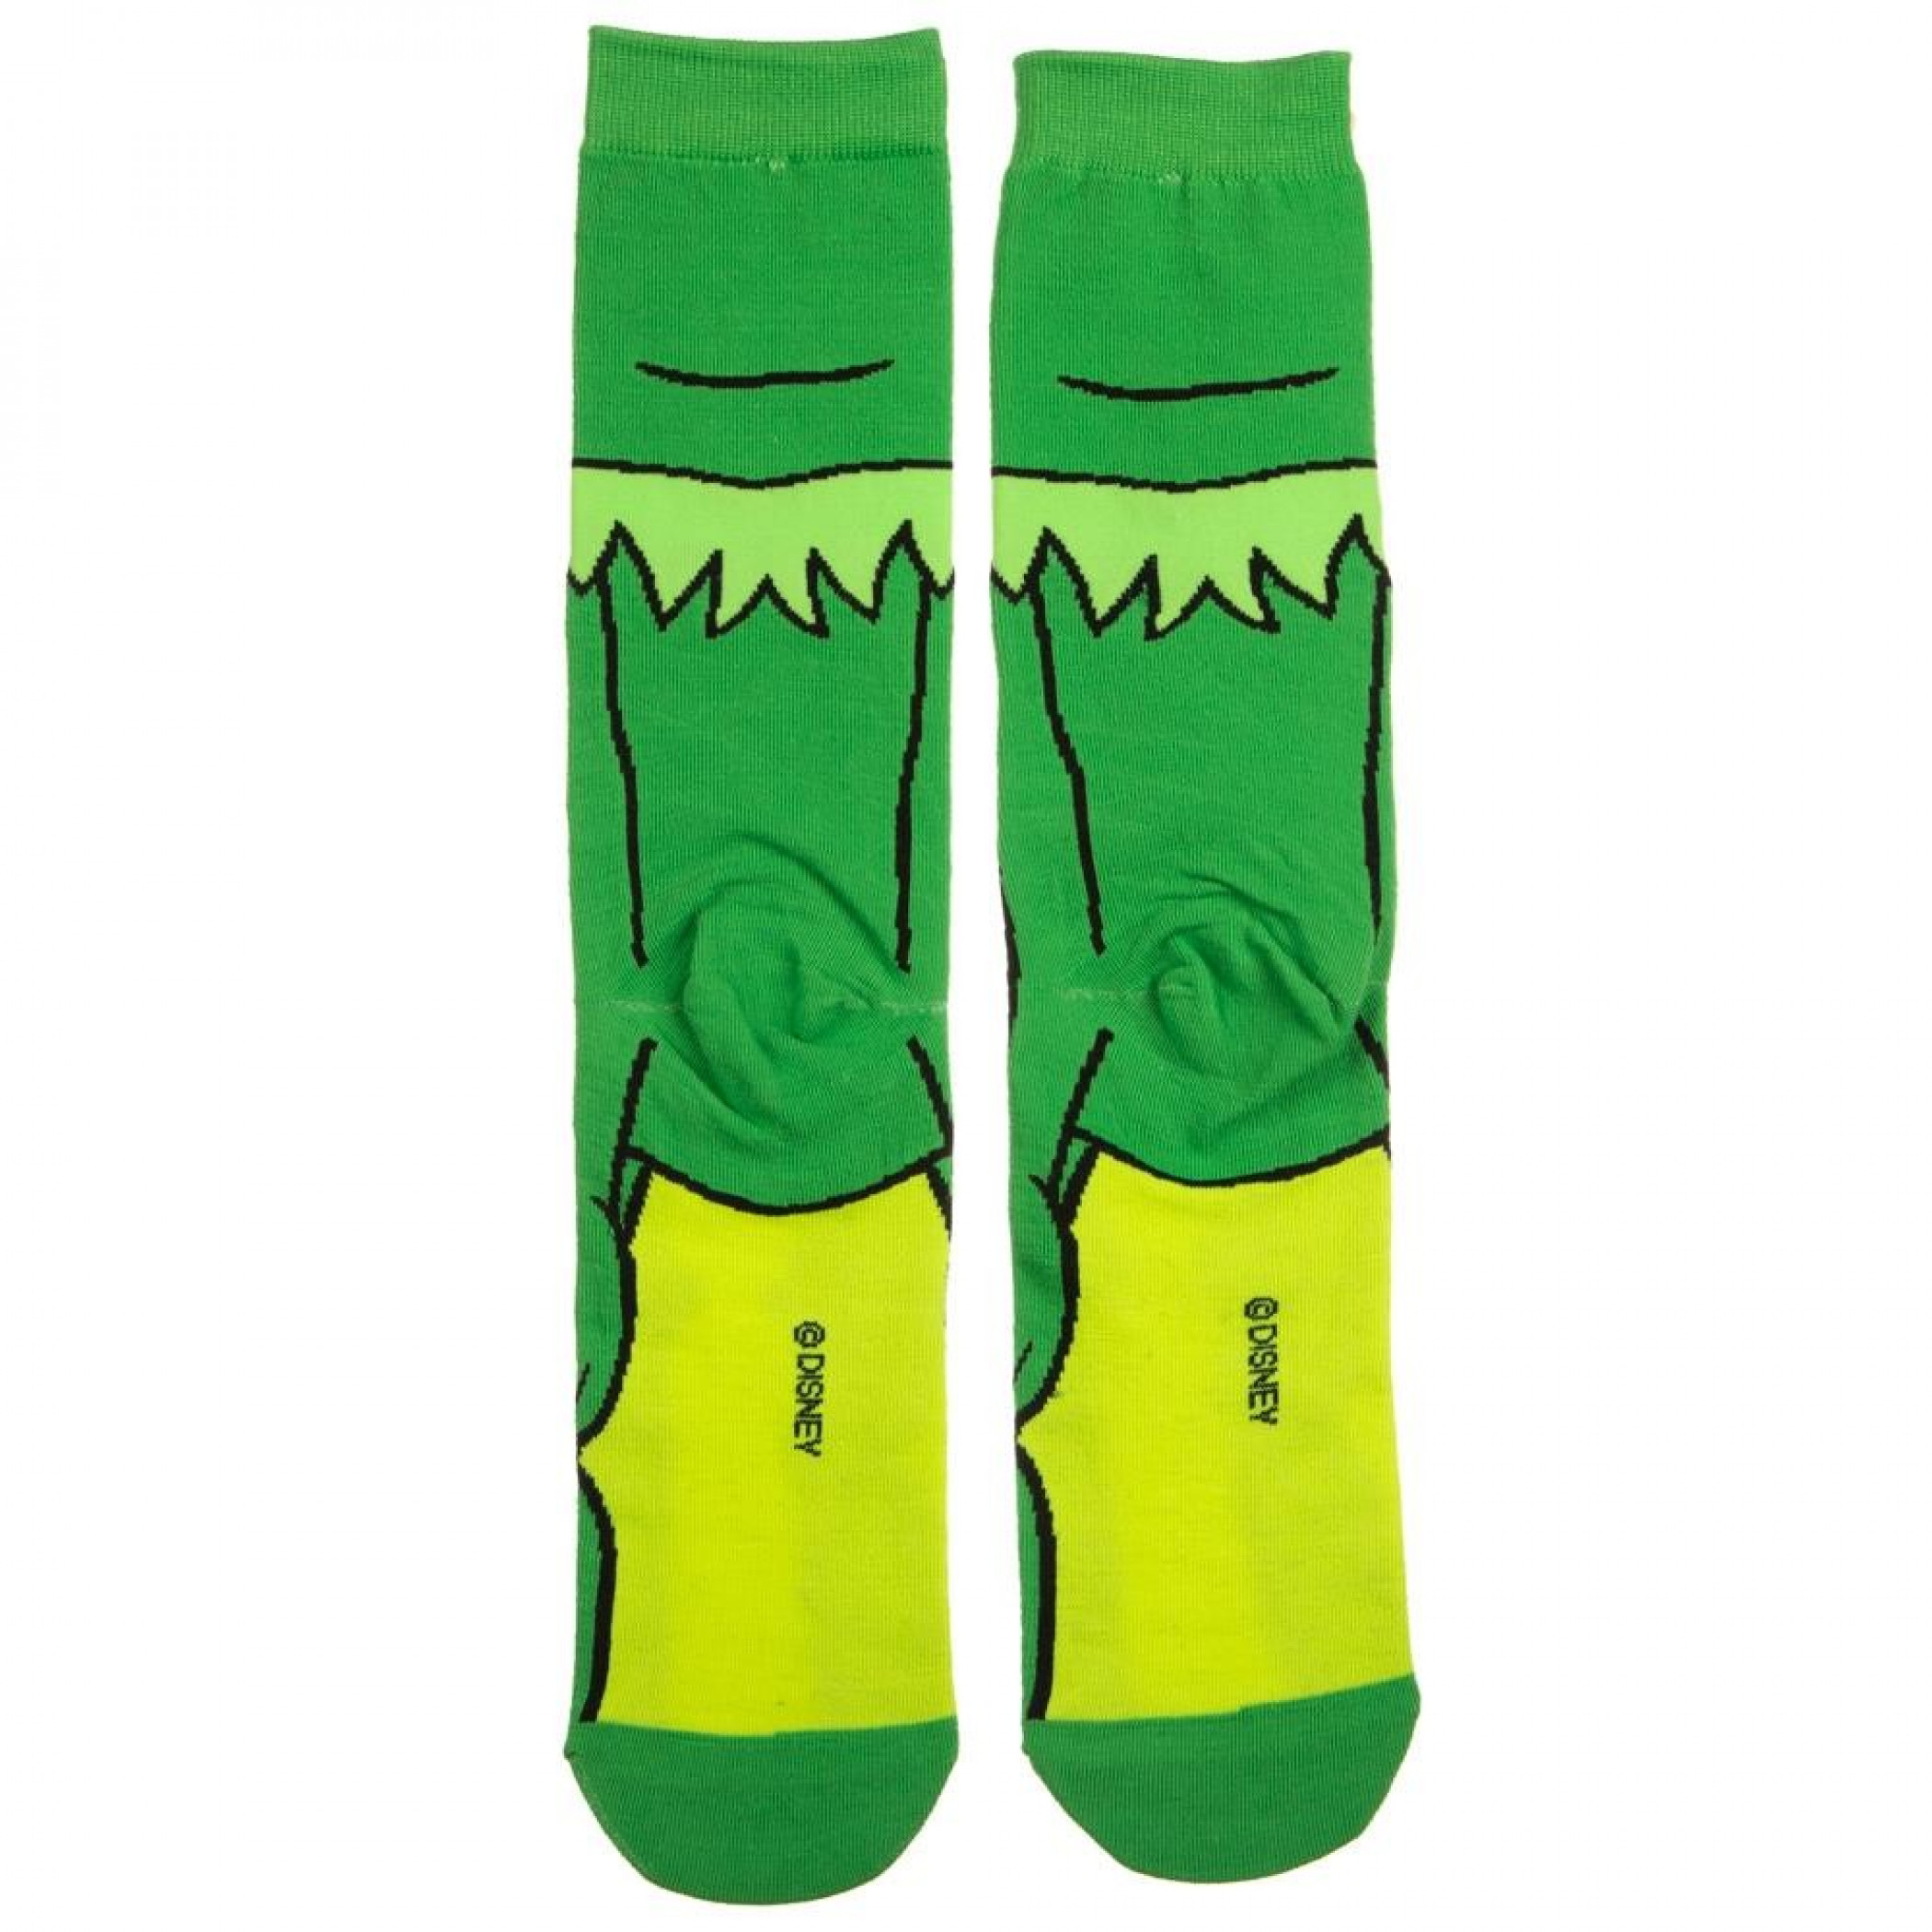 Disney The Muppets All Over Character Pattern Sublimated Crew Socks 1 Pair